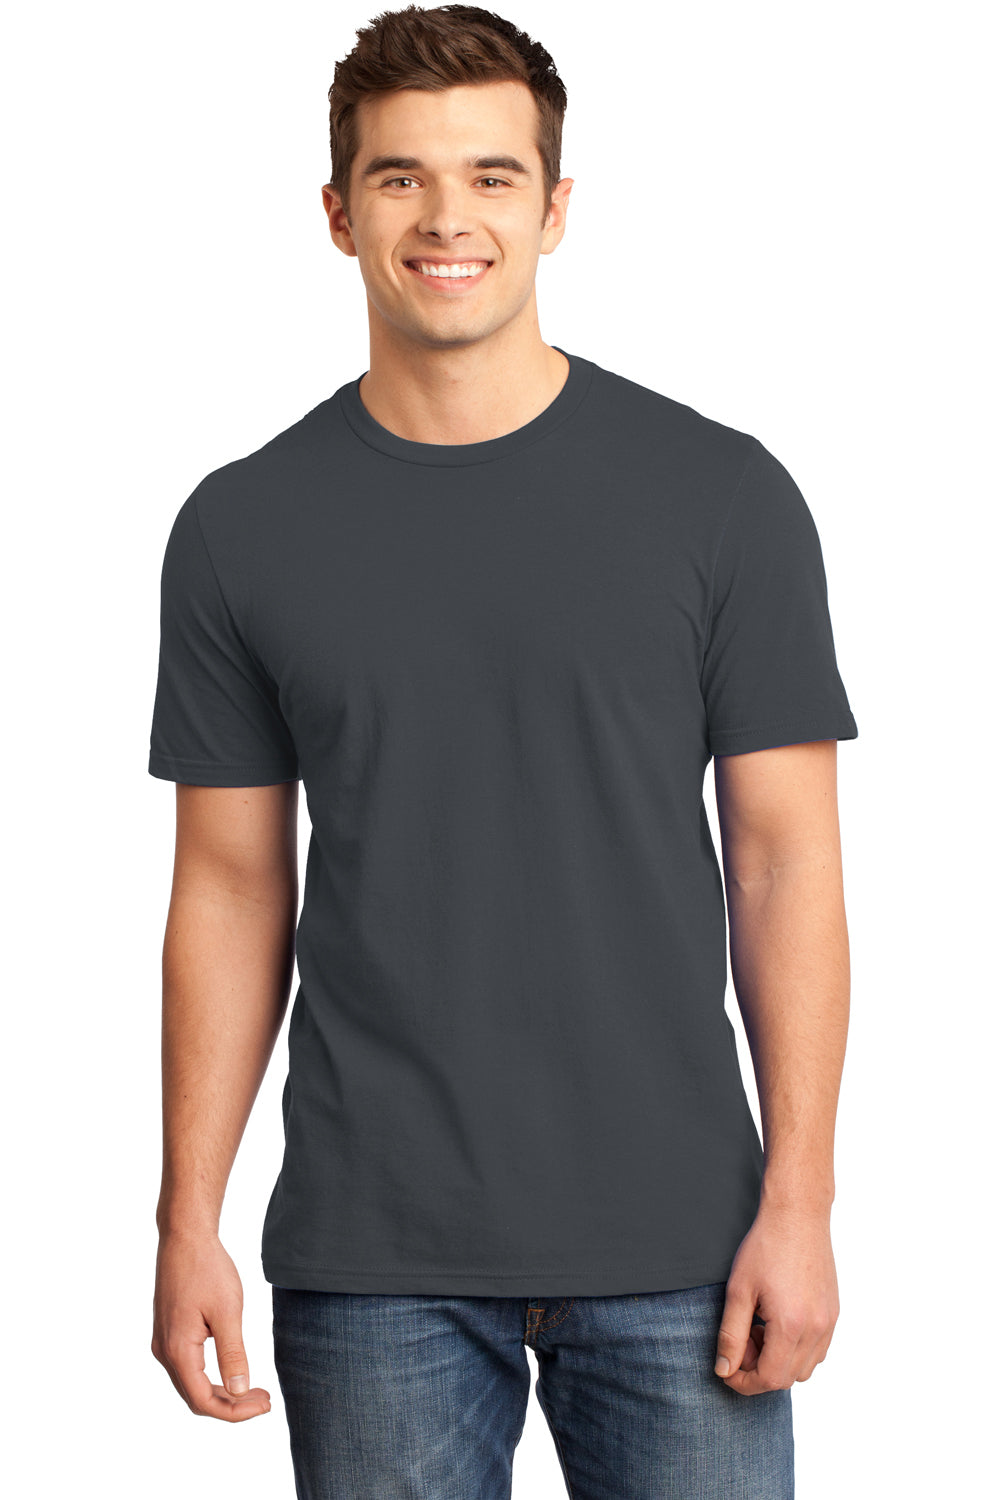 District DT6000 Mens Very Important Short Sleeve Crewneck T-Shirt Charcoal Grey Front